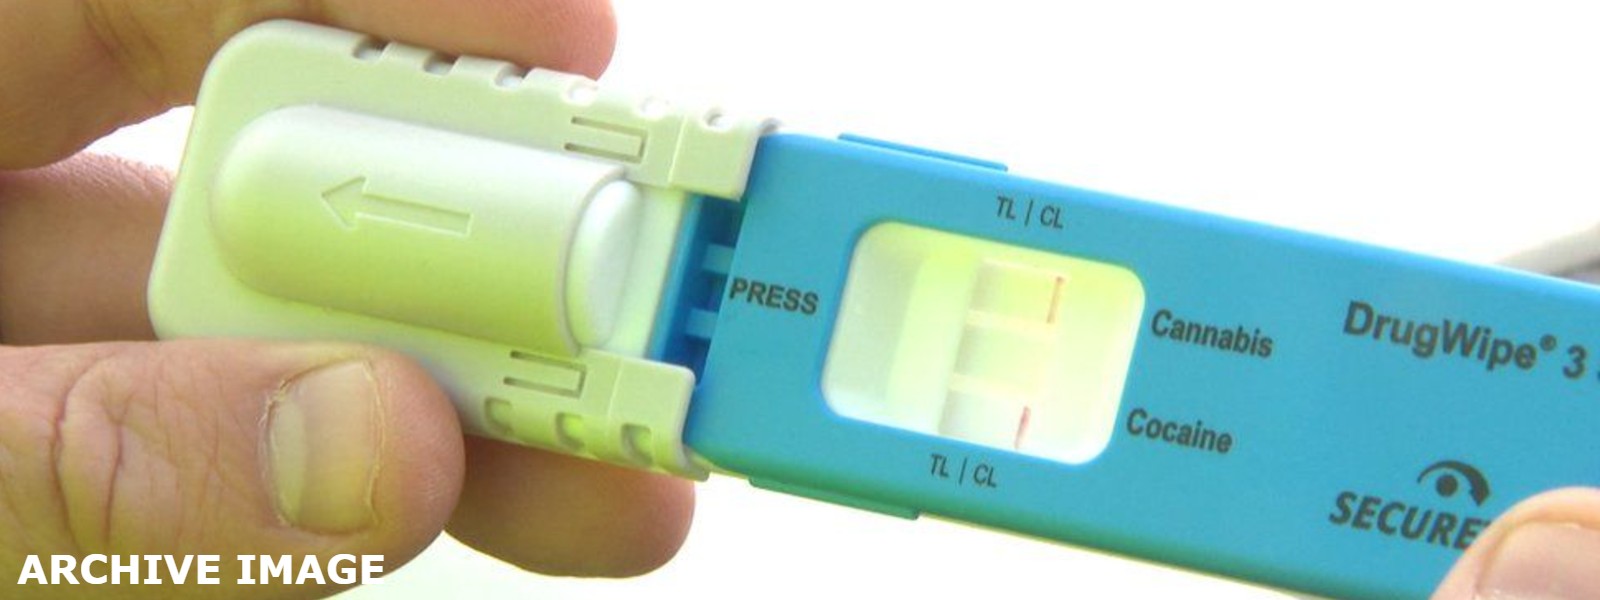 Police to use drug test kits to detect people driving under the influence of drugs